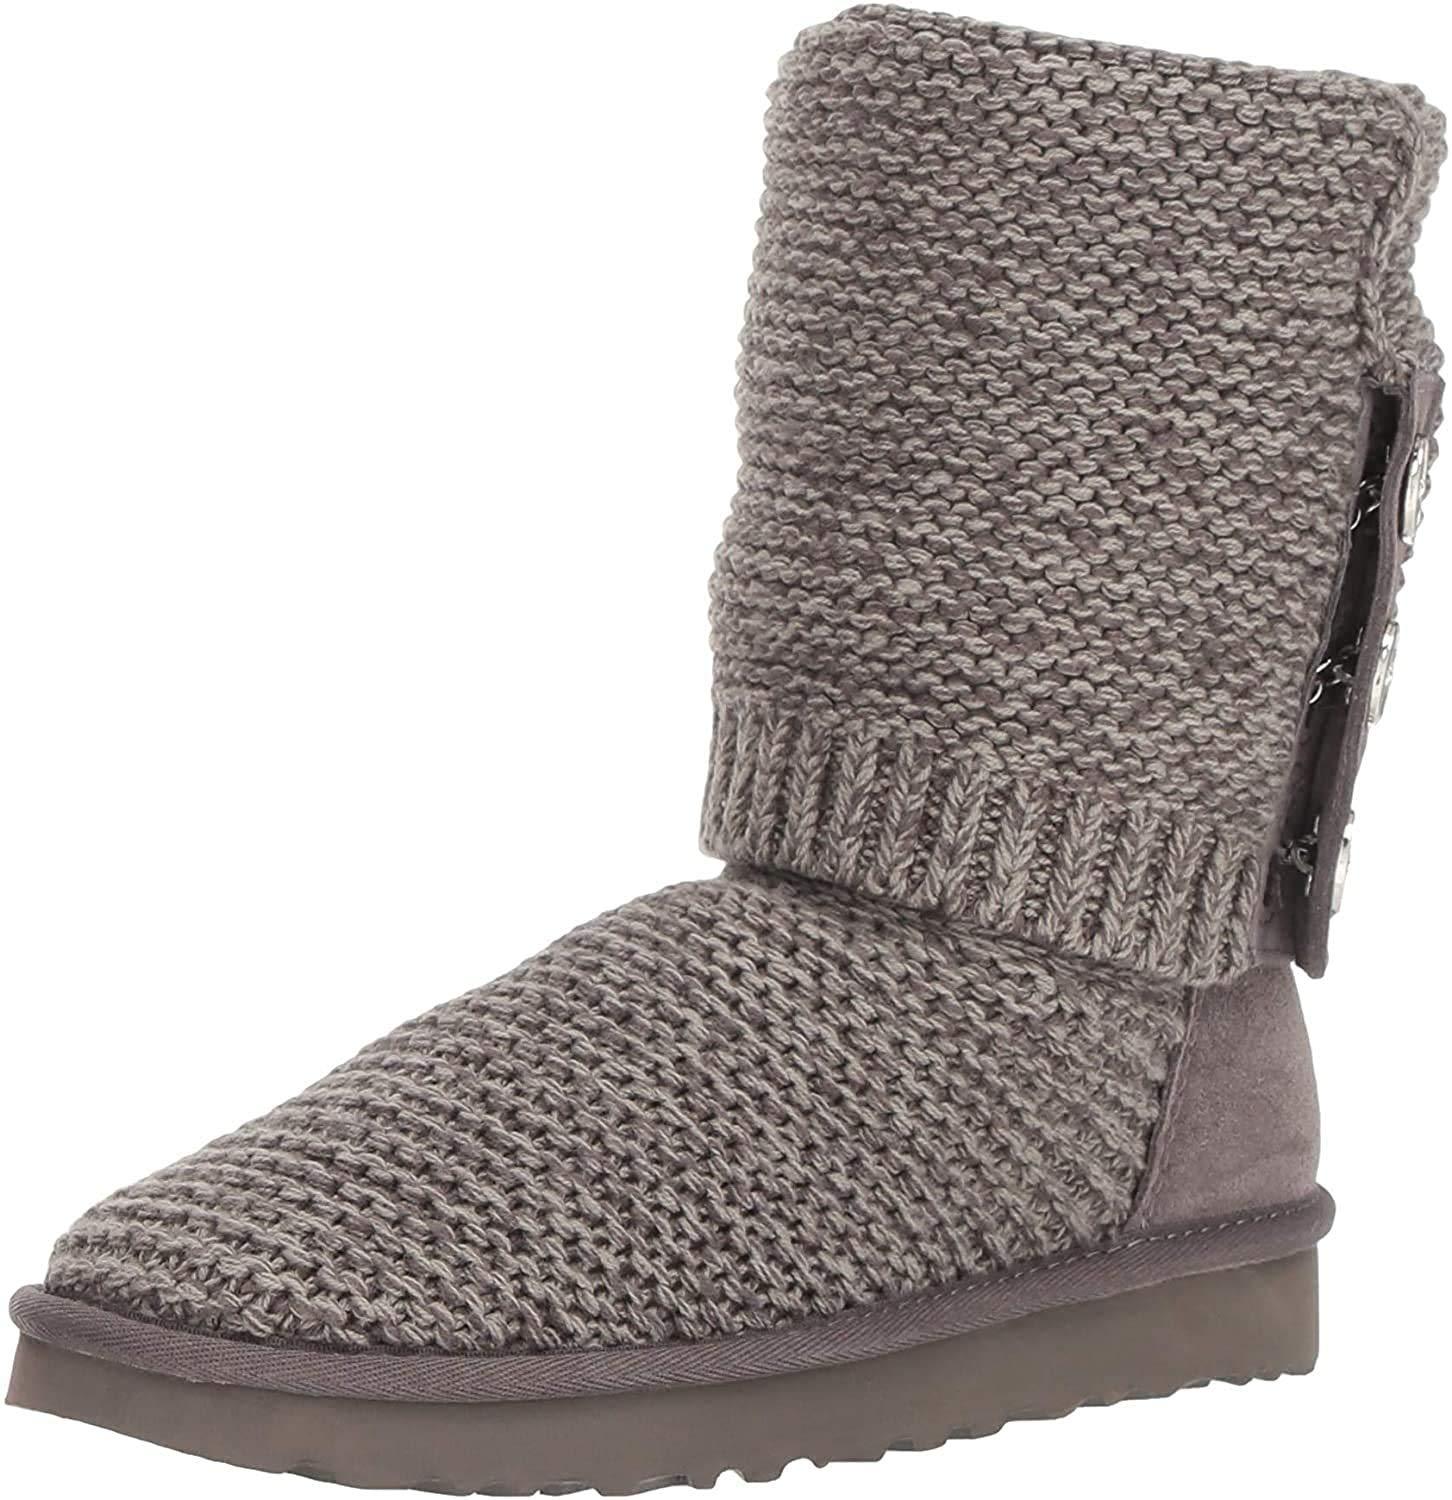 UGG Wool W Purl Cardy Knit Fashion Boot in Cream (Natural) - Lyst